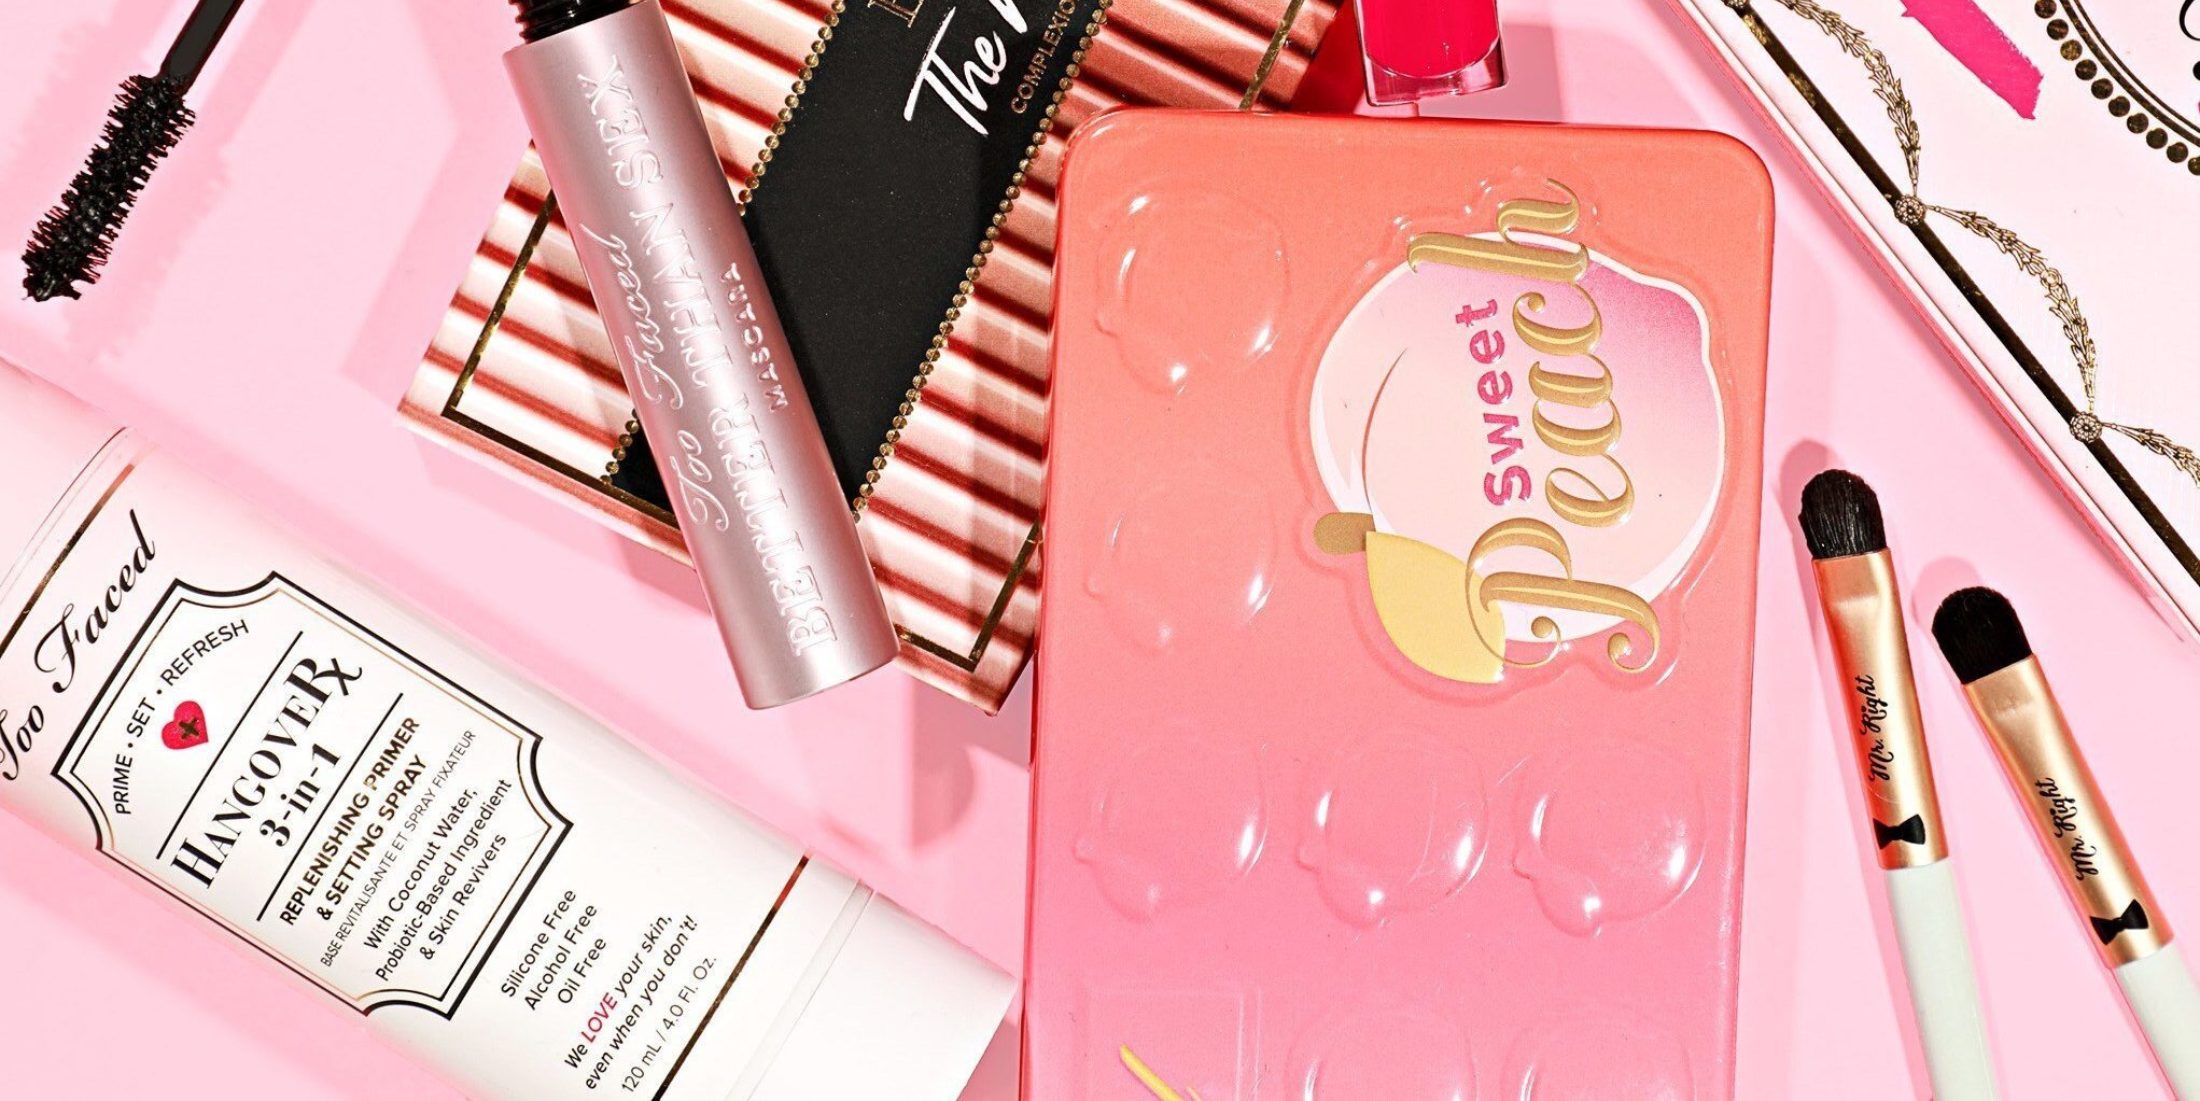 Too Faced 2